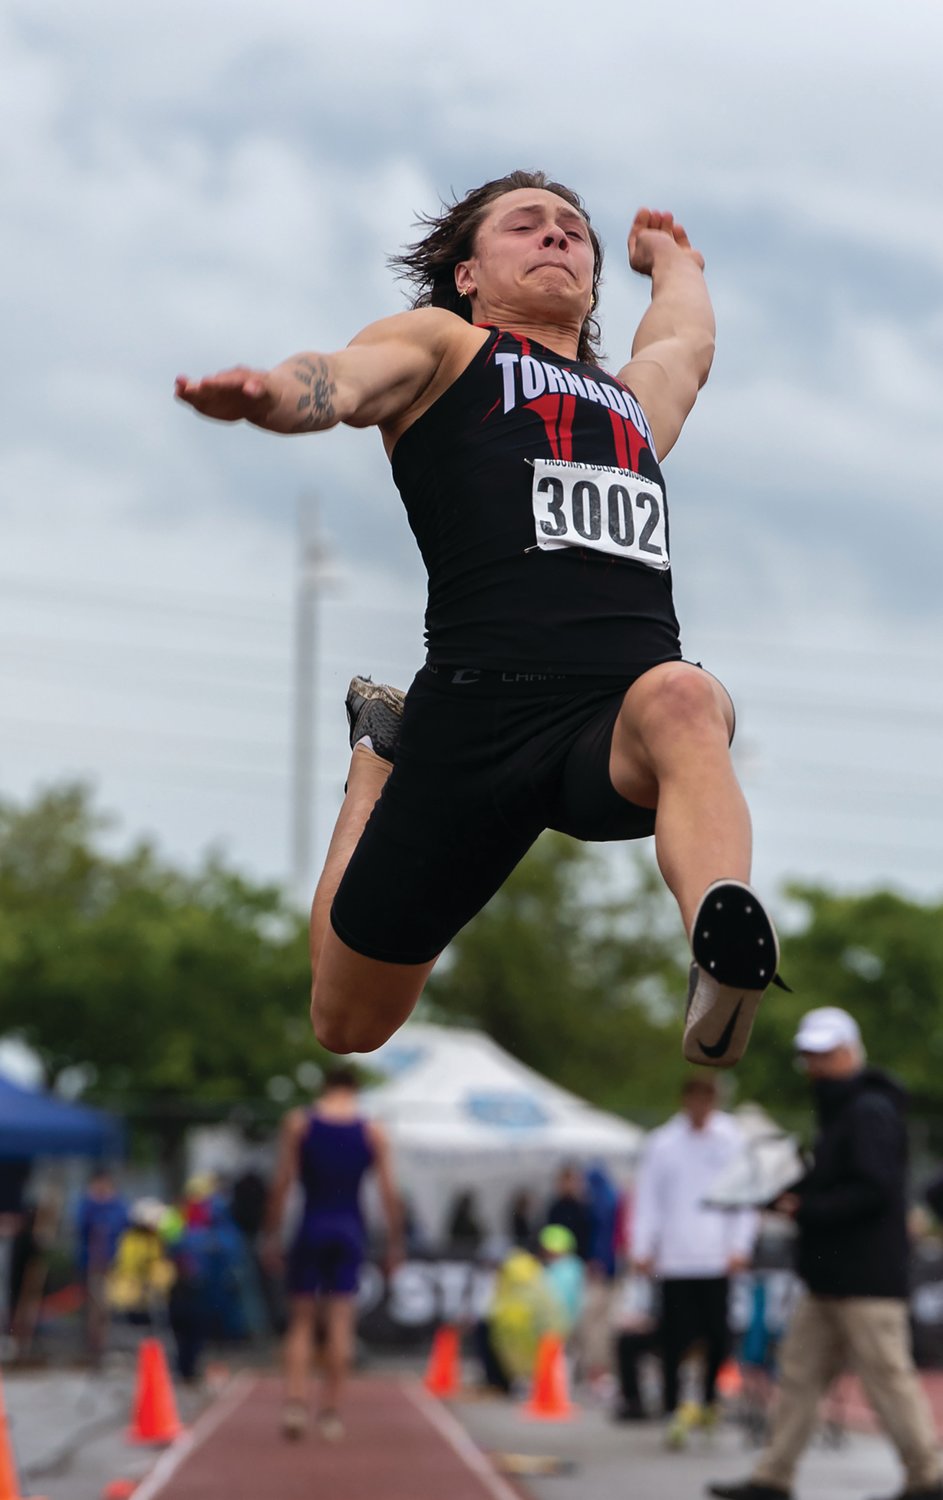 Yelm's Kyler Ronquillo long jumps at the 2A/3A/4A State Track and Field Championships on Thursday, May 26, 2022, at Mount Tahoma High School in Tacoma. (Joshua Hart/For XXXX)